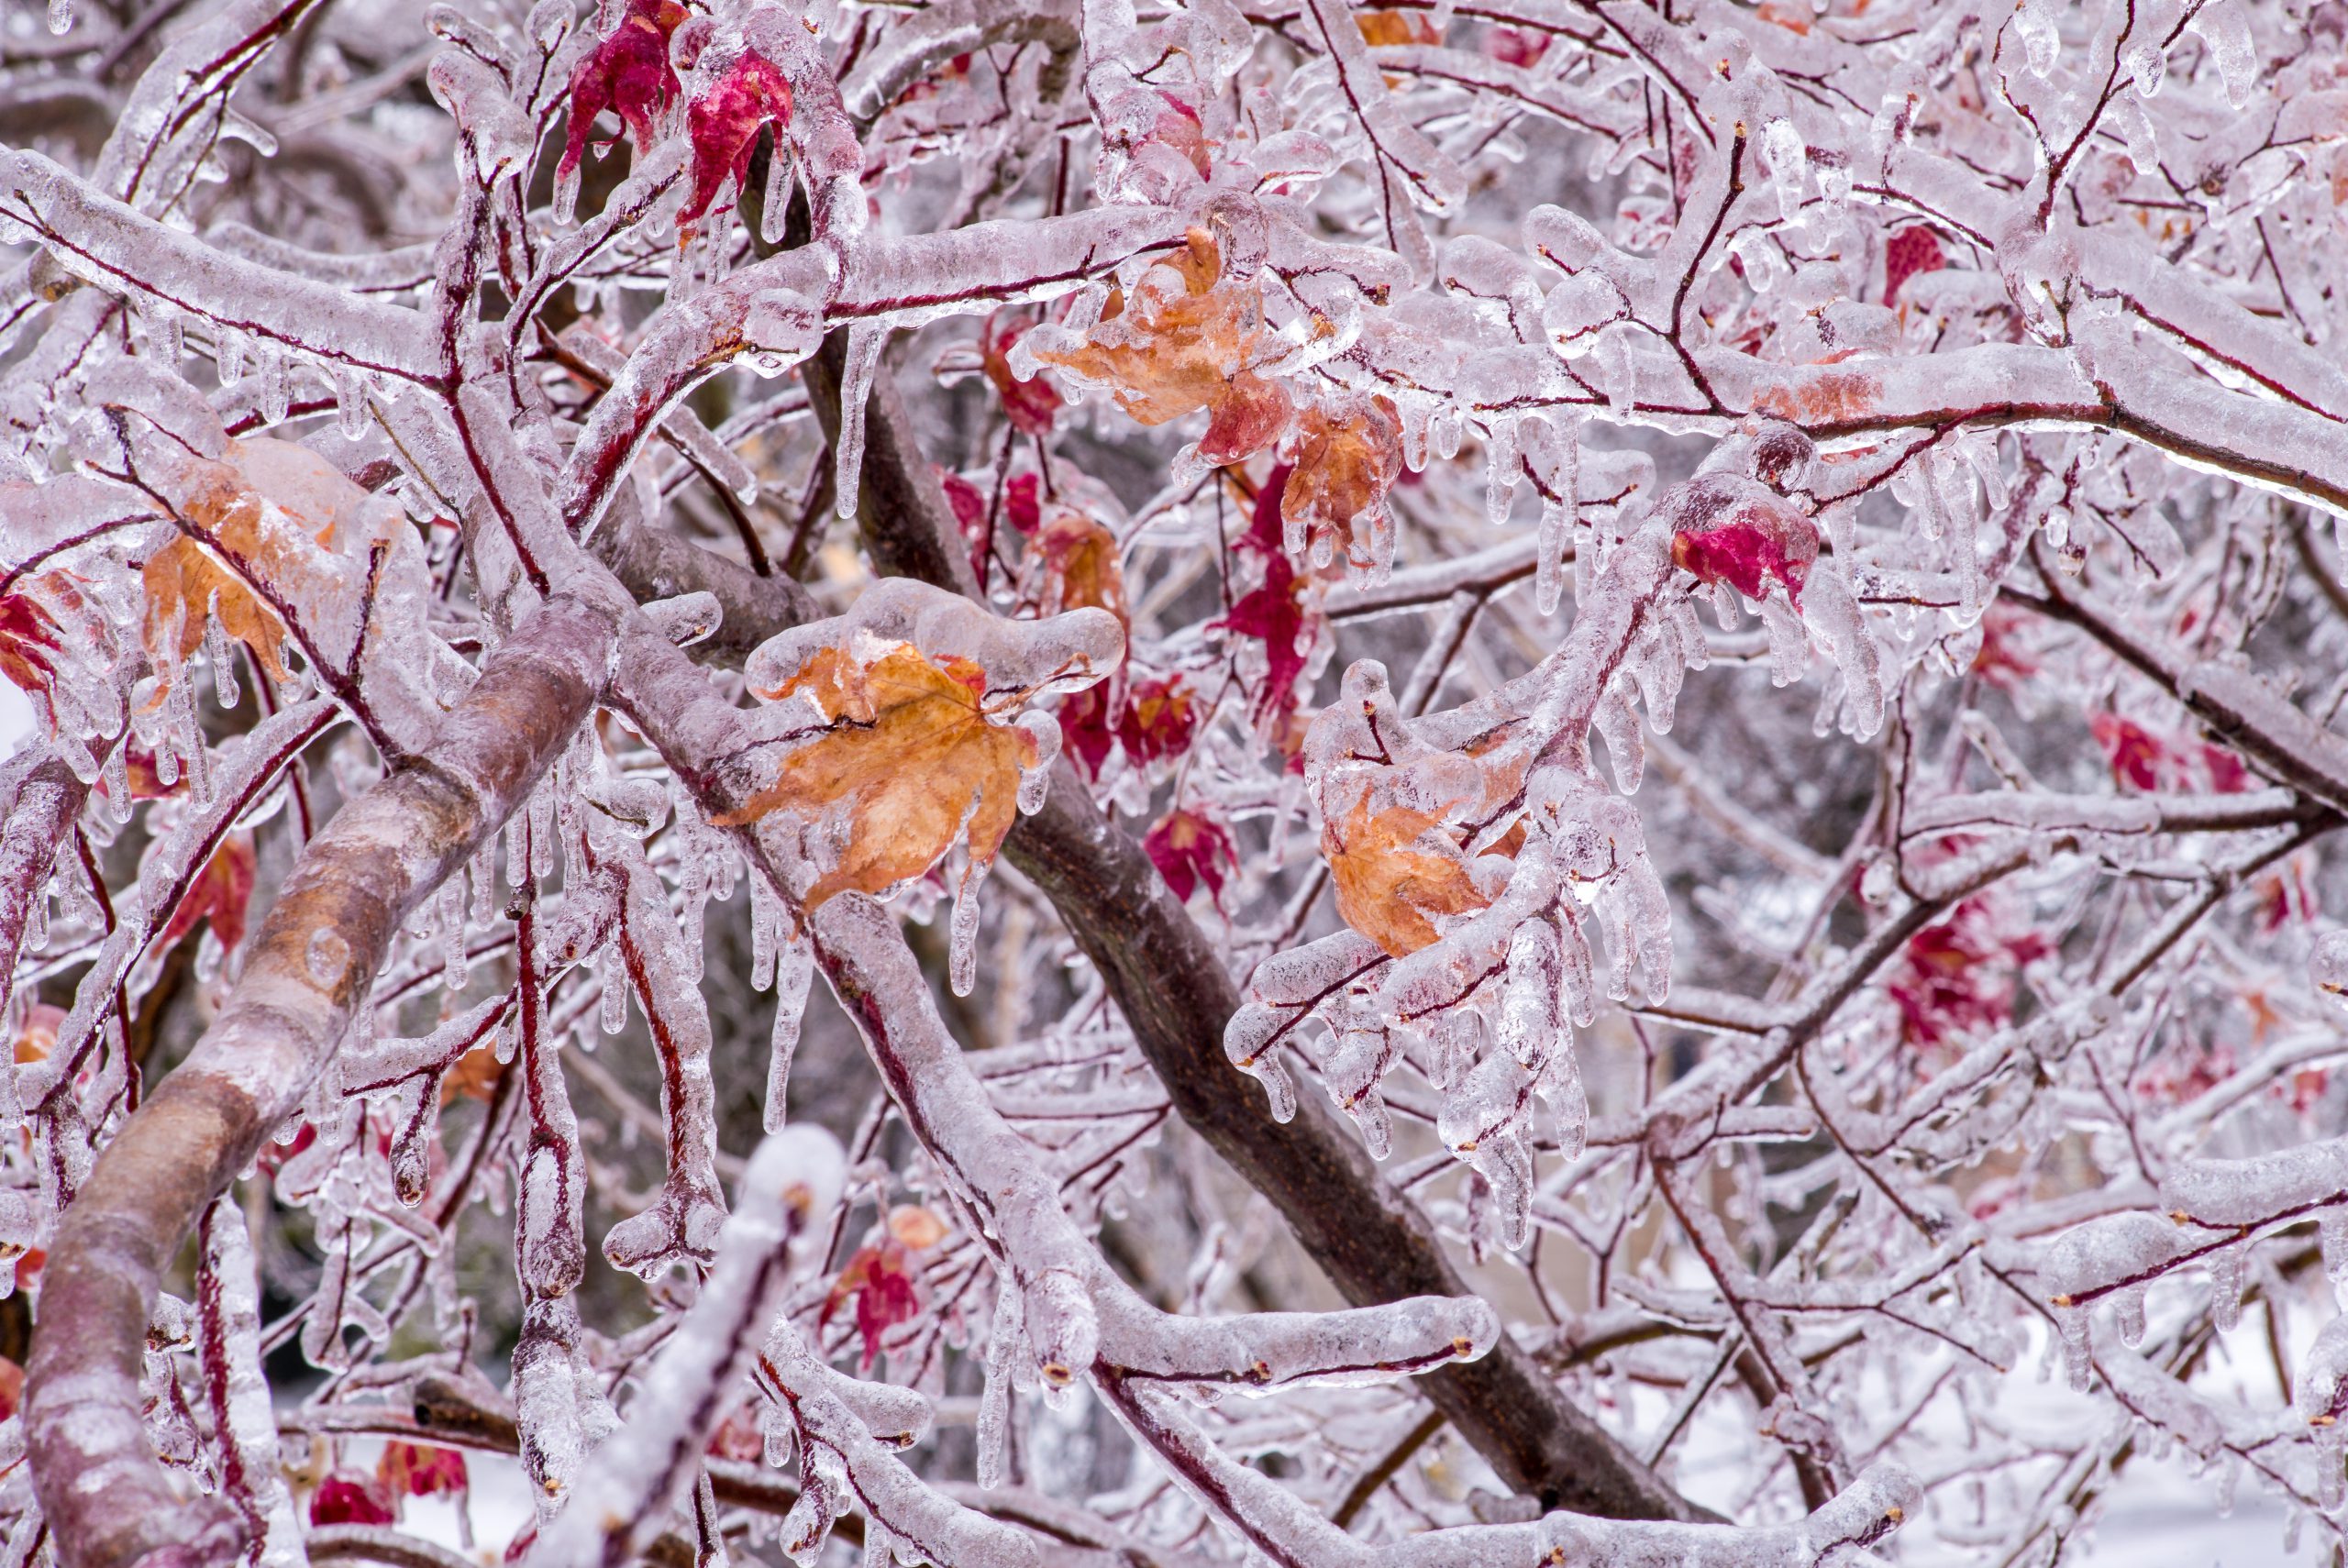 Ice Branches